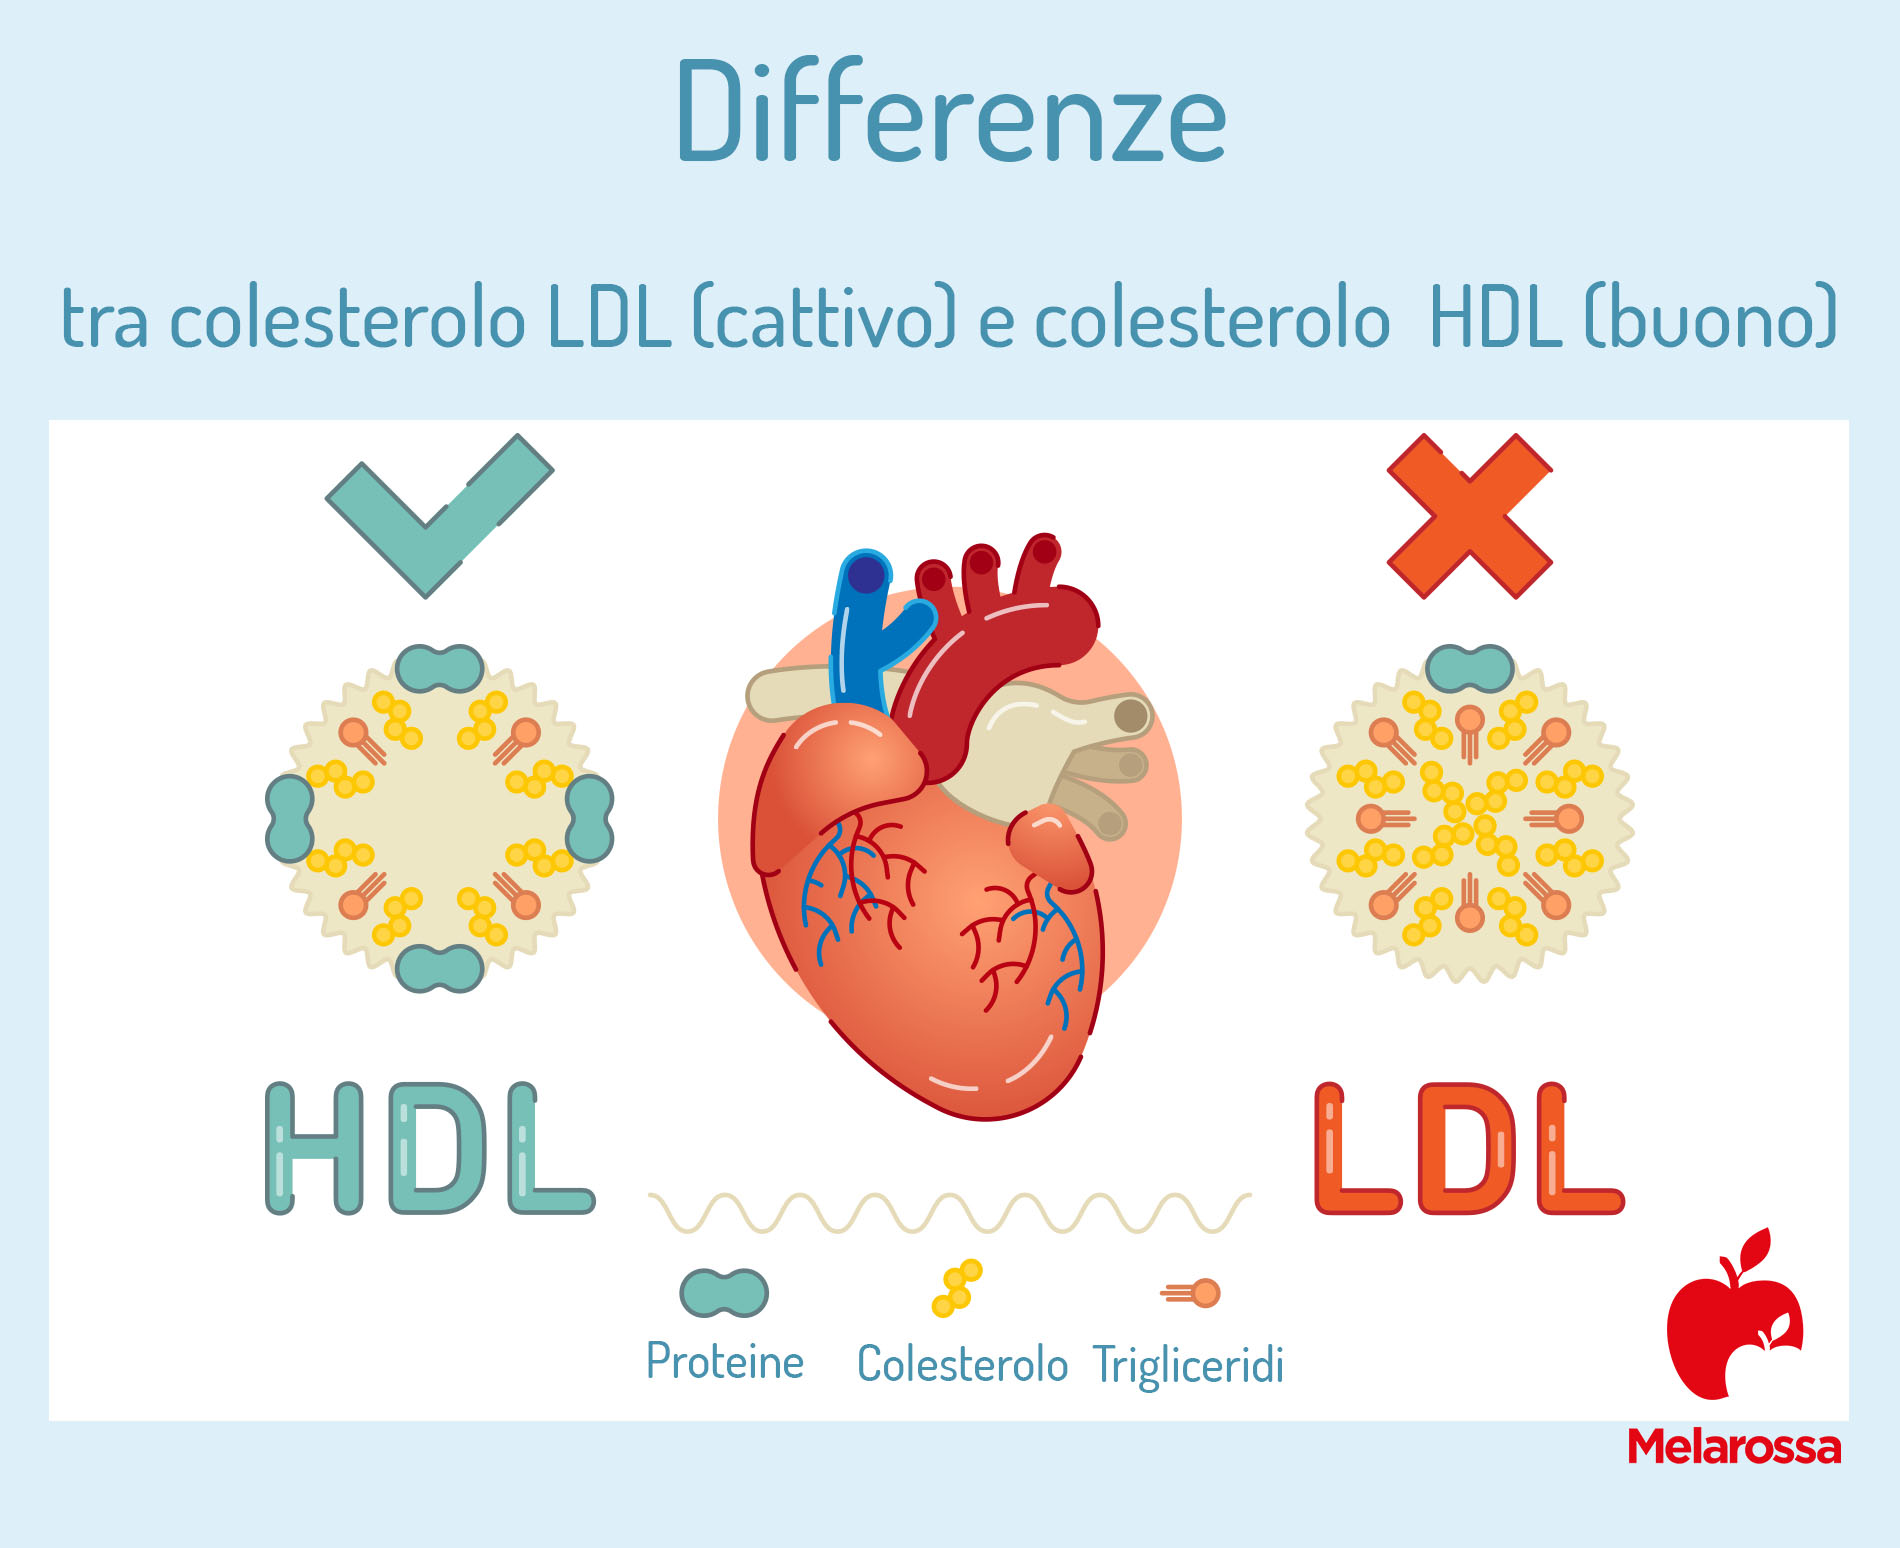 colesterolo totale: HDL + LDL